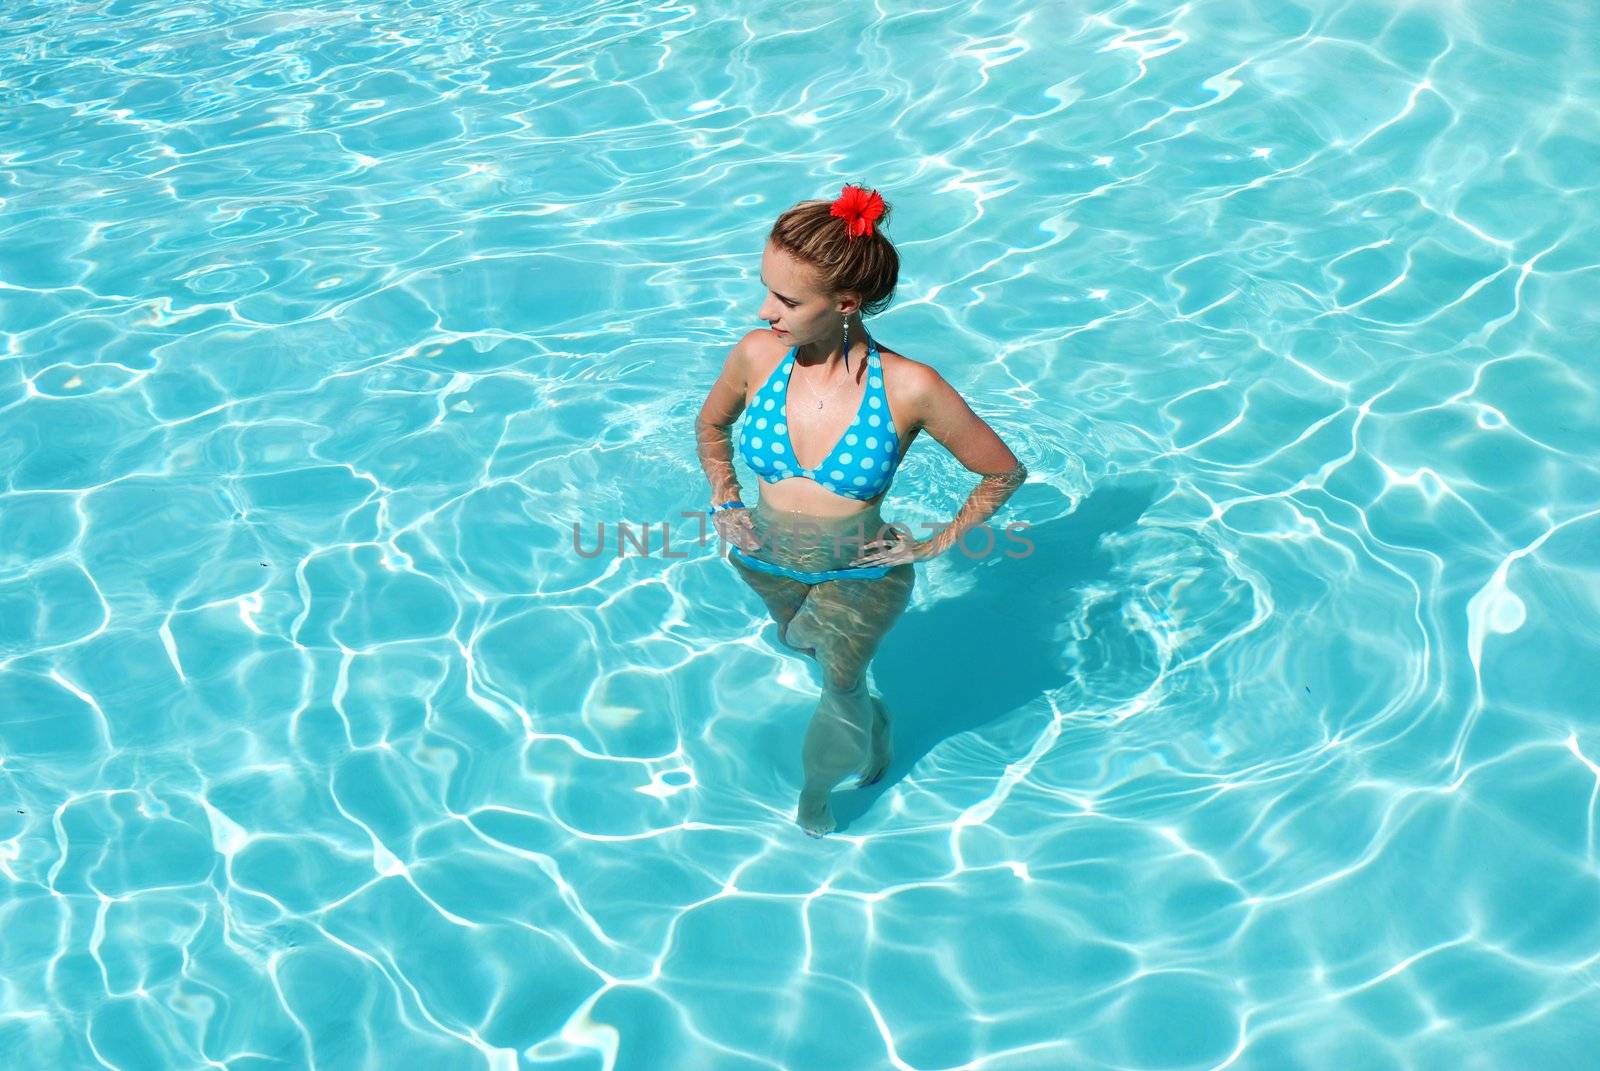 Girl in swimming pool by haveseen